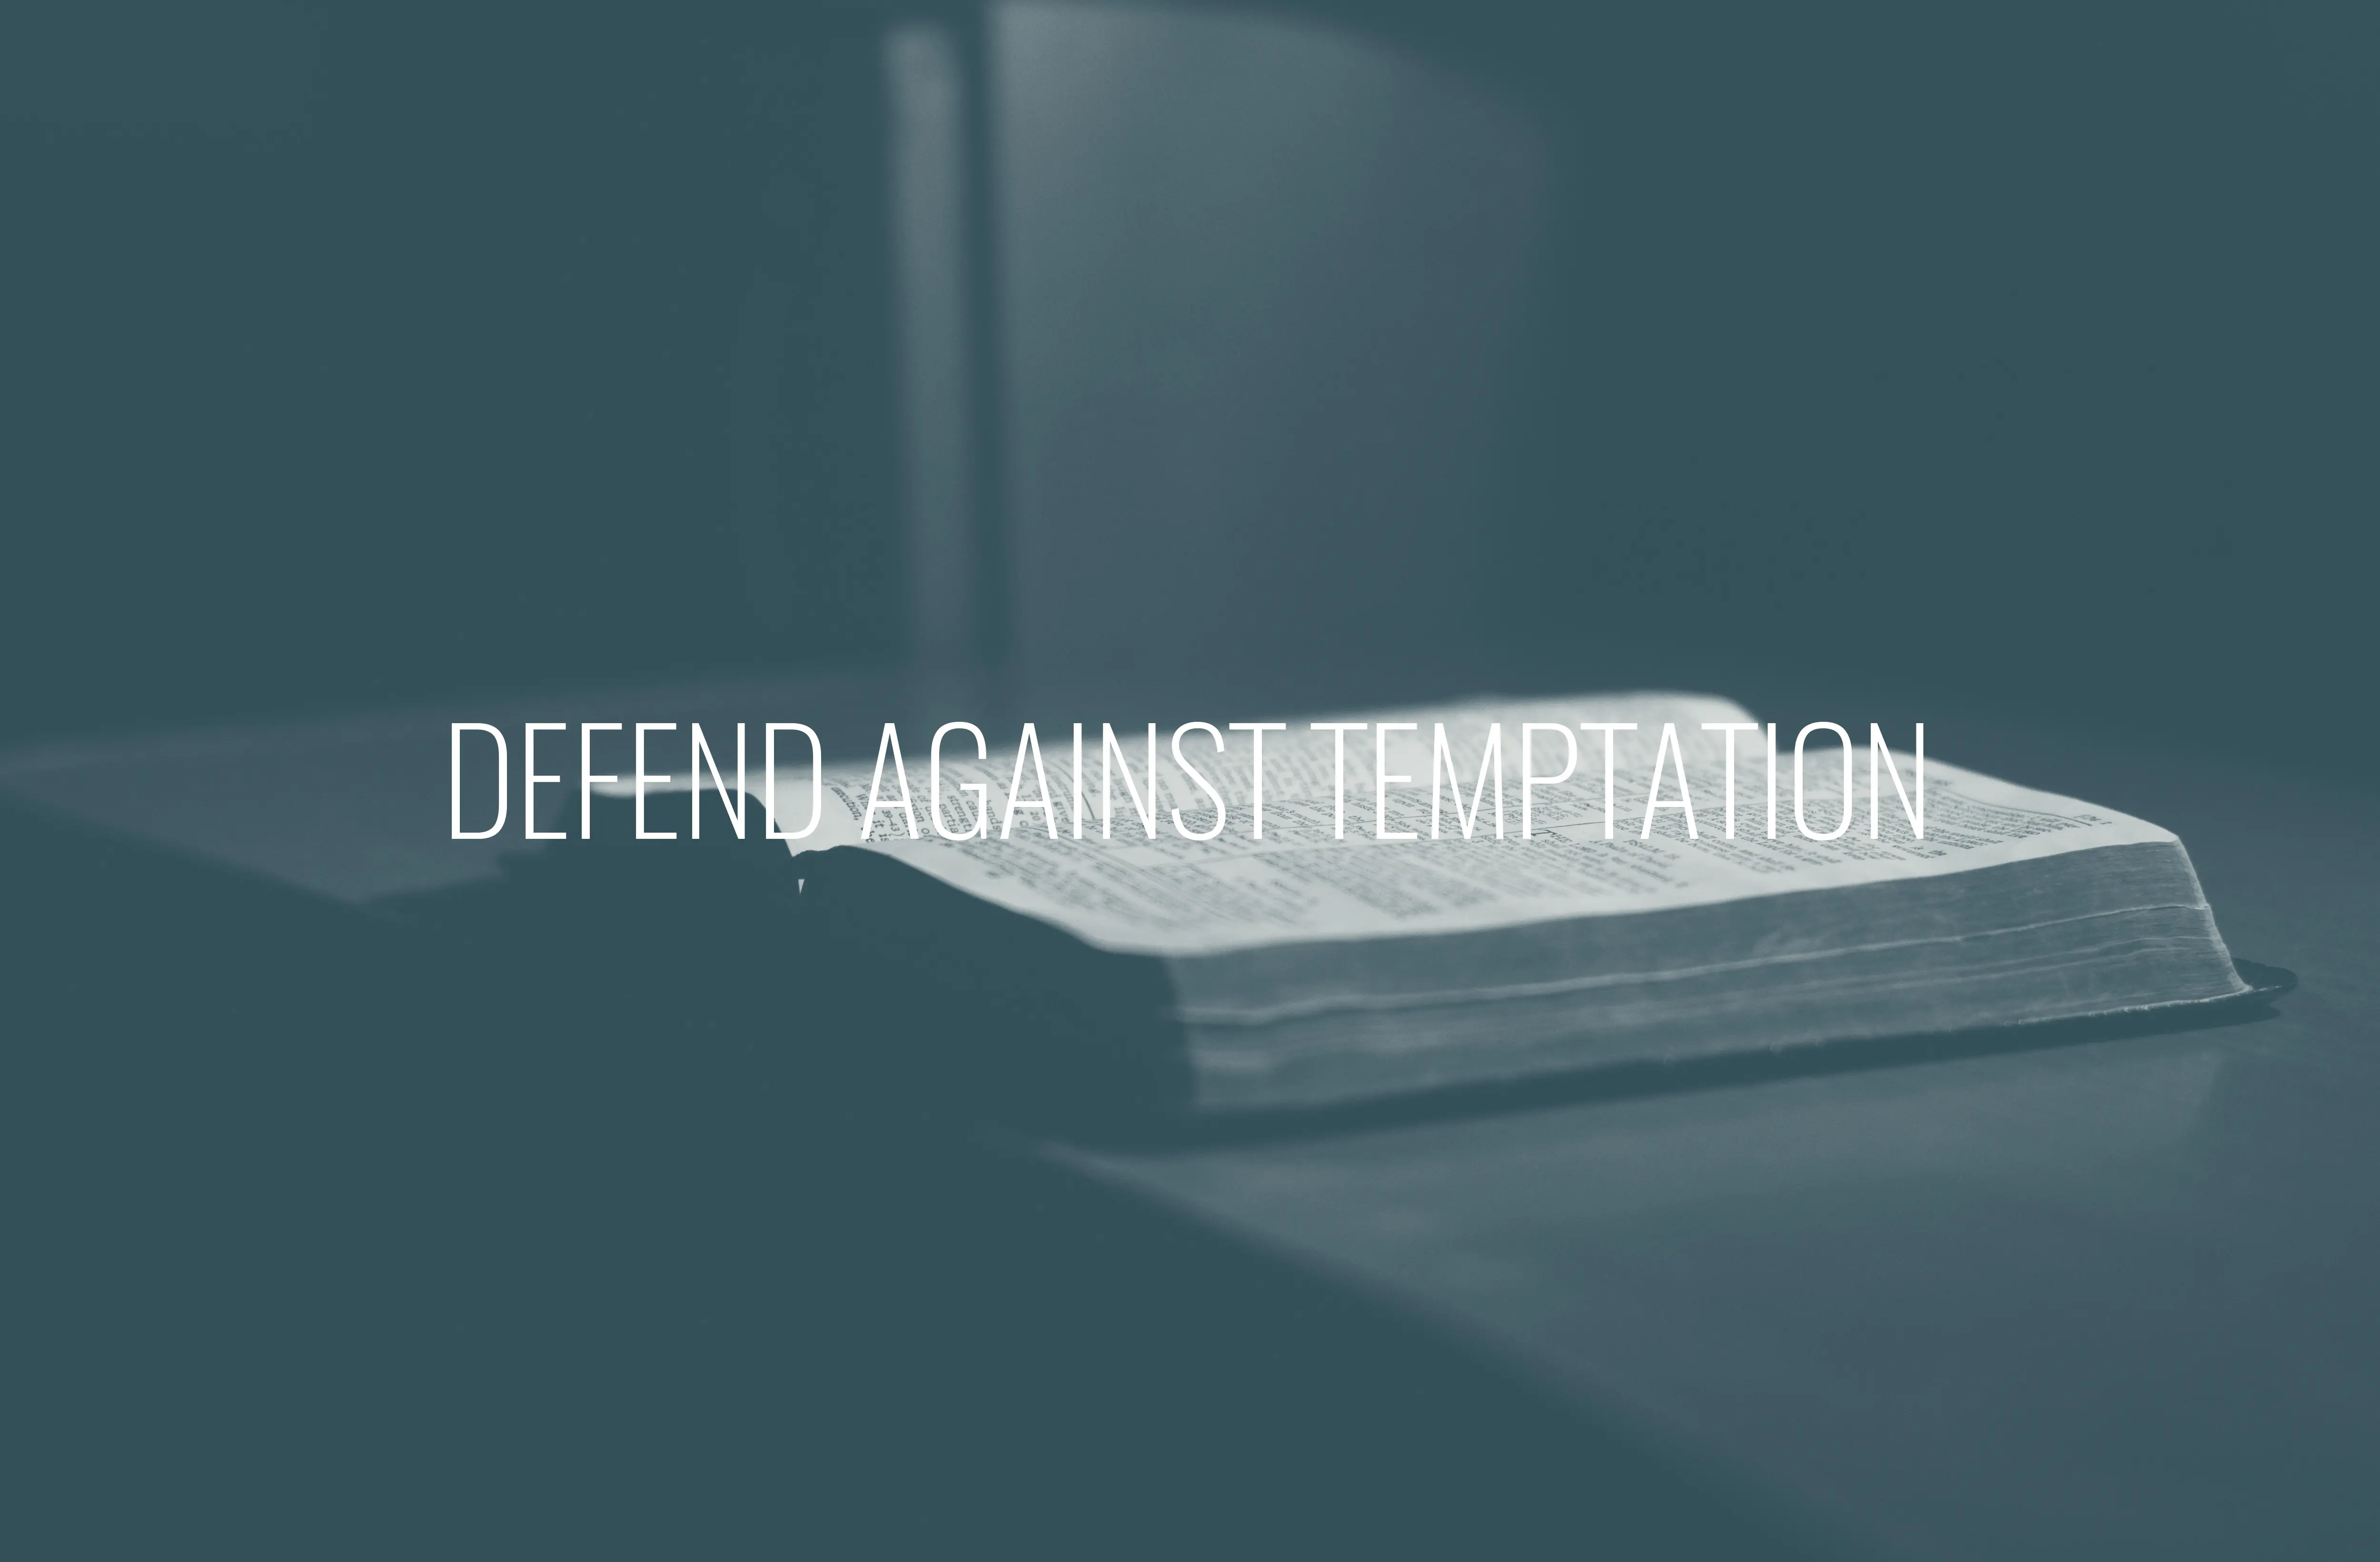 Featured image for “Defend Against Temptation”